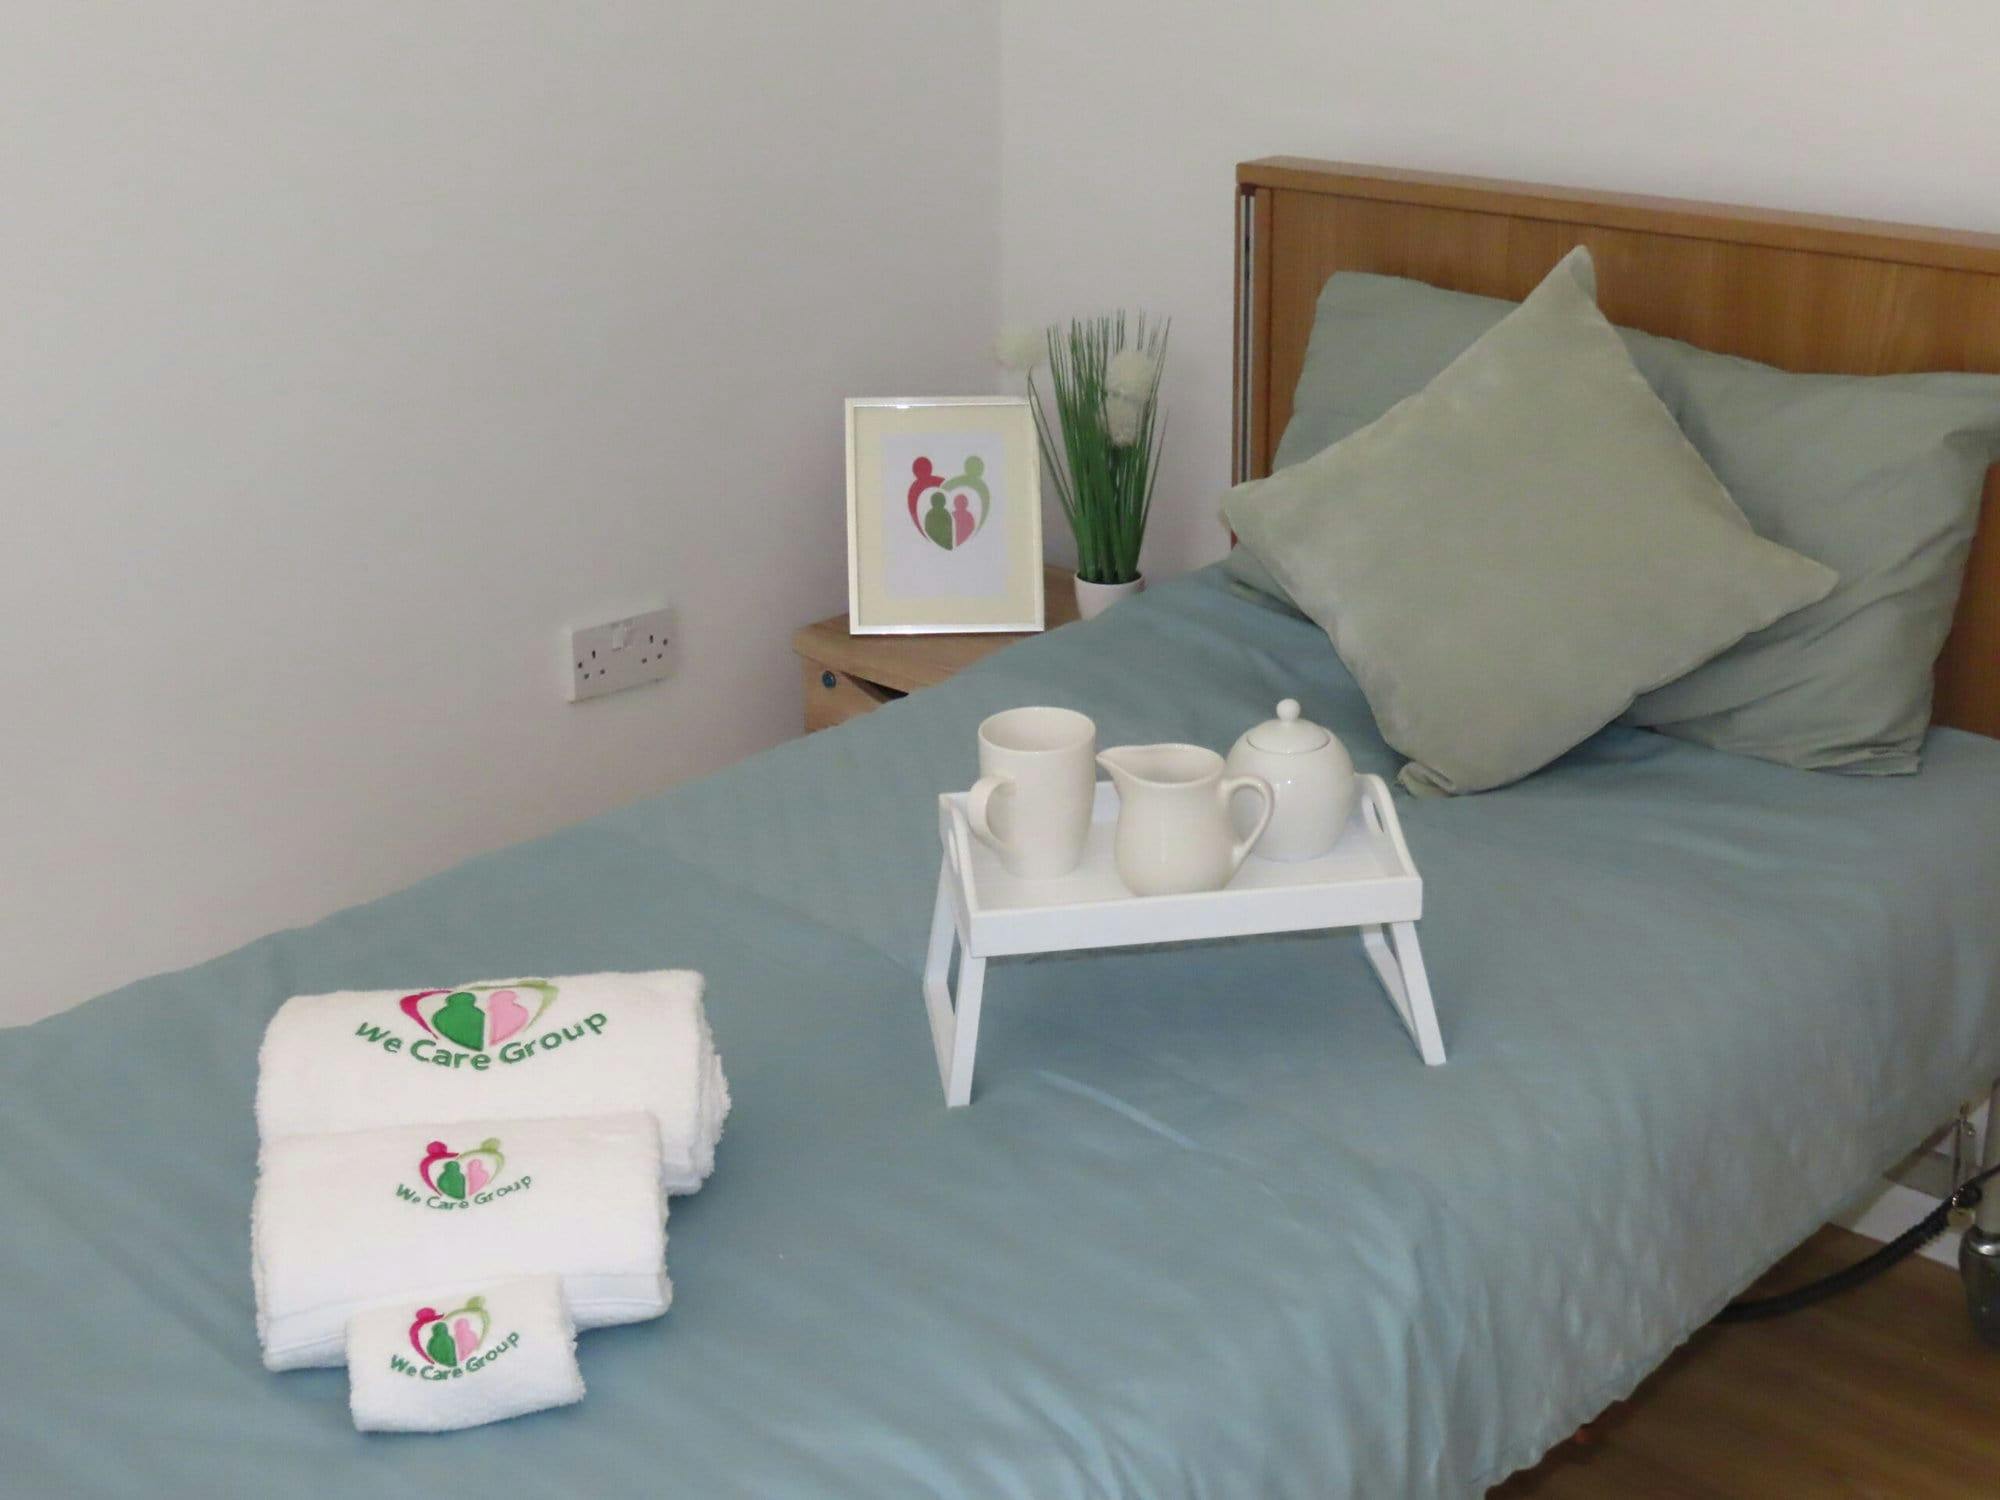 Bedroom at Knowles Court Care Home, Bradford, West Yorkshire